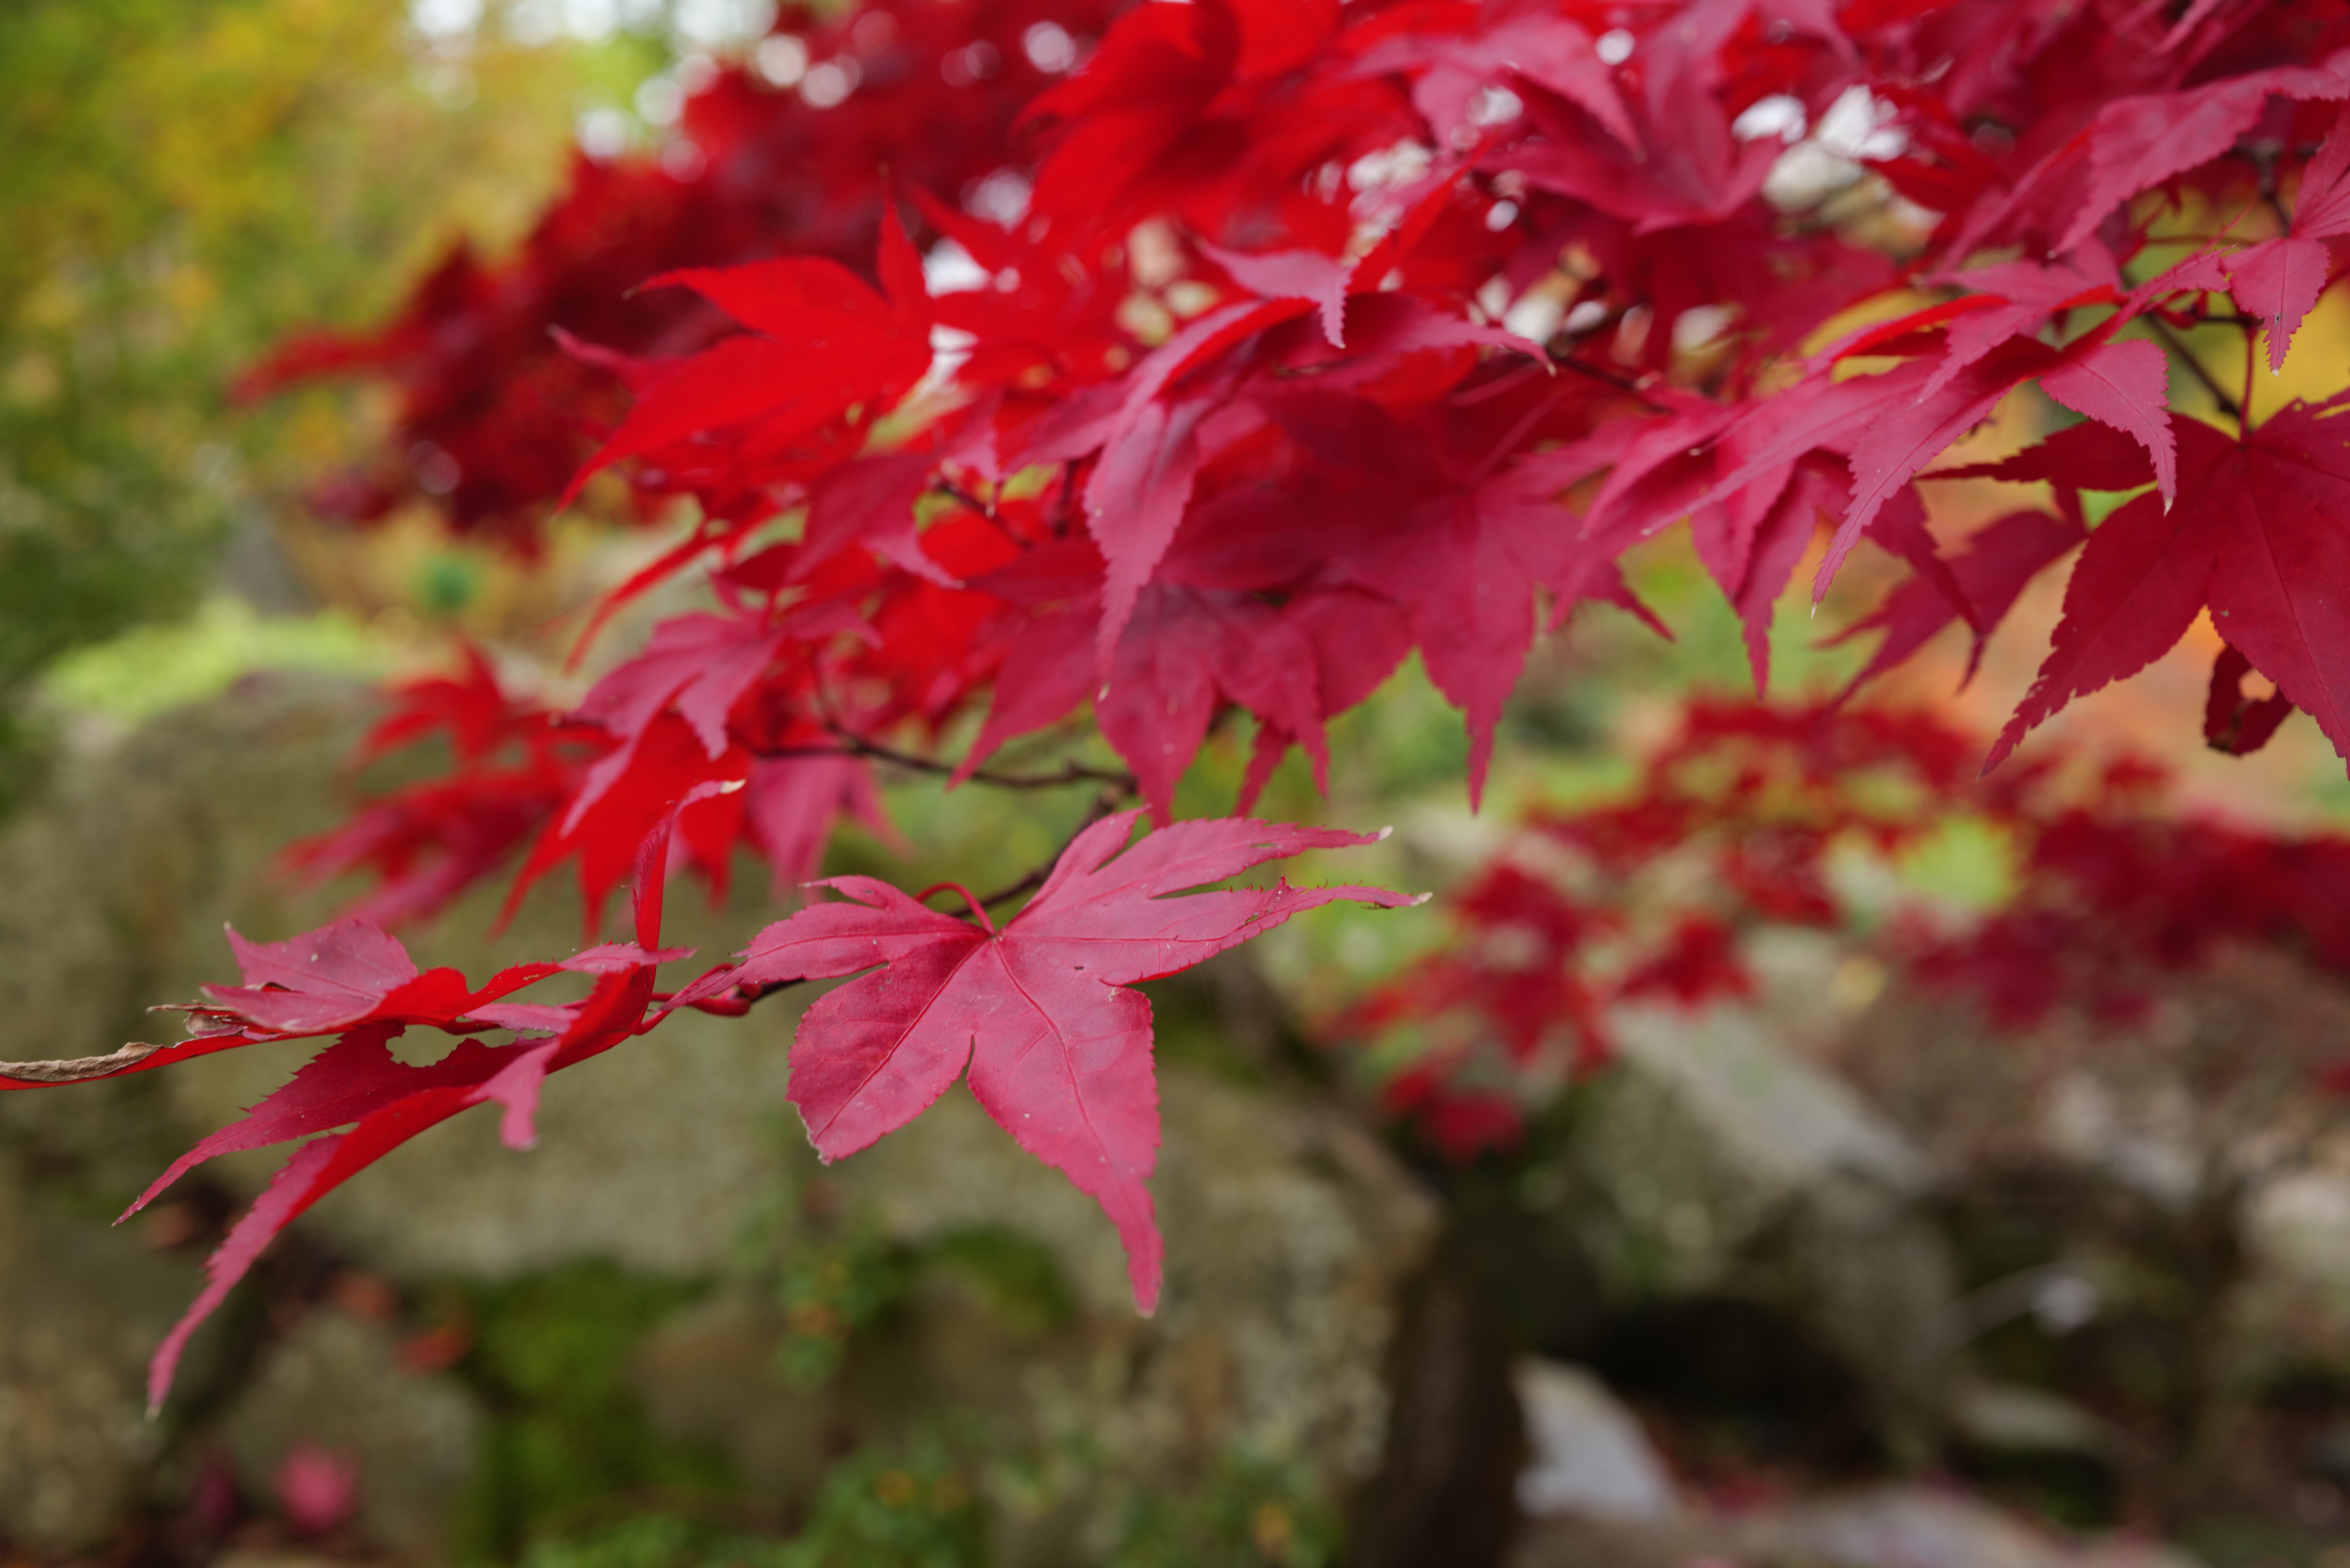 Red leaves, 1/60s, f/6.3, ISO500, -0.3ev